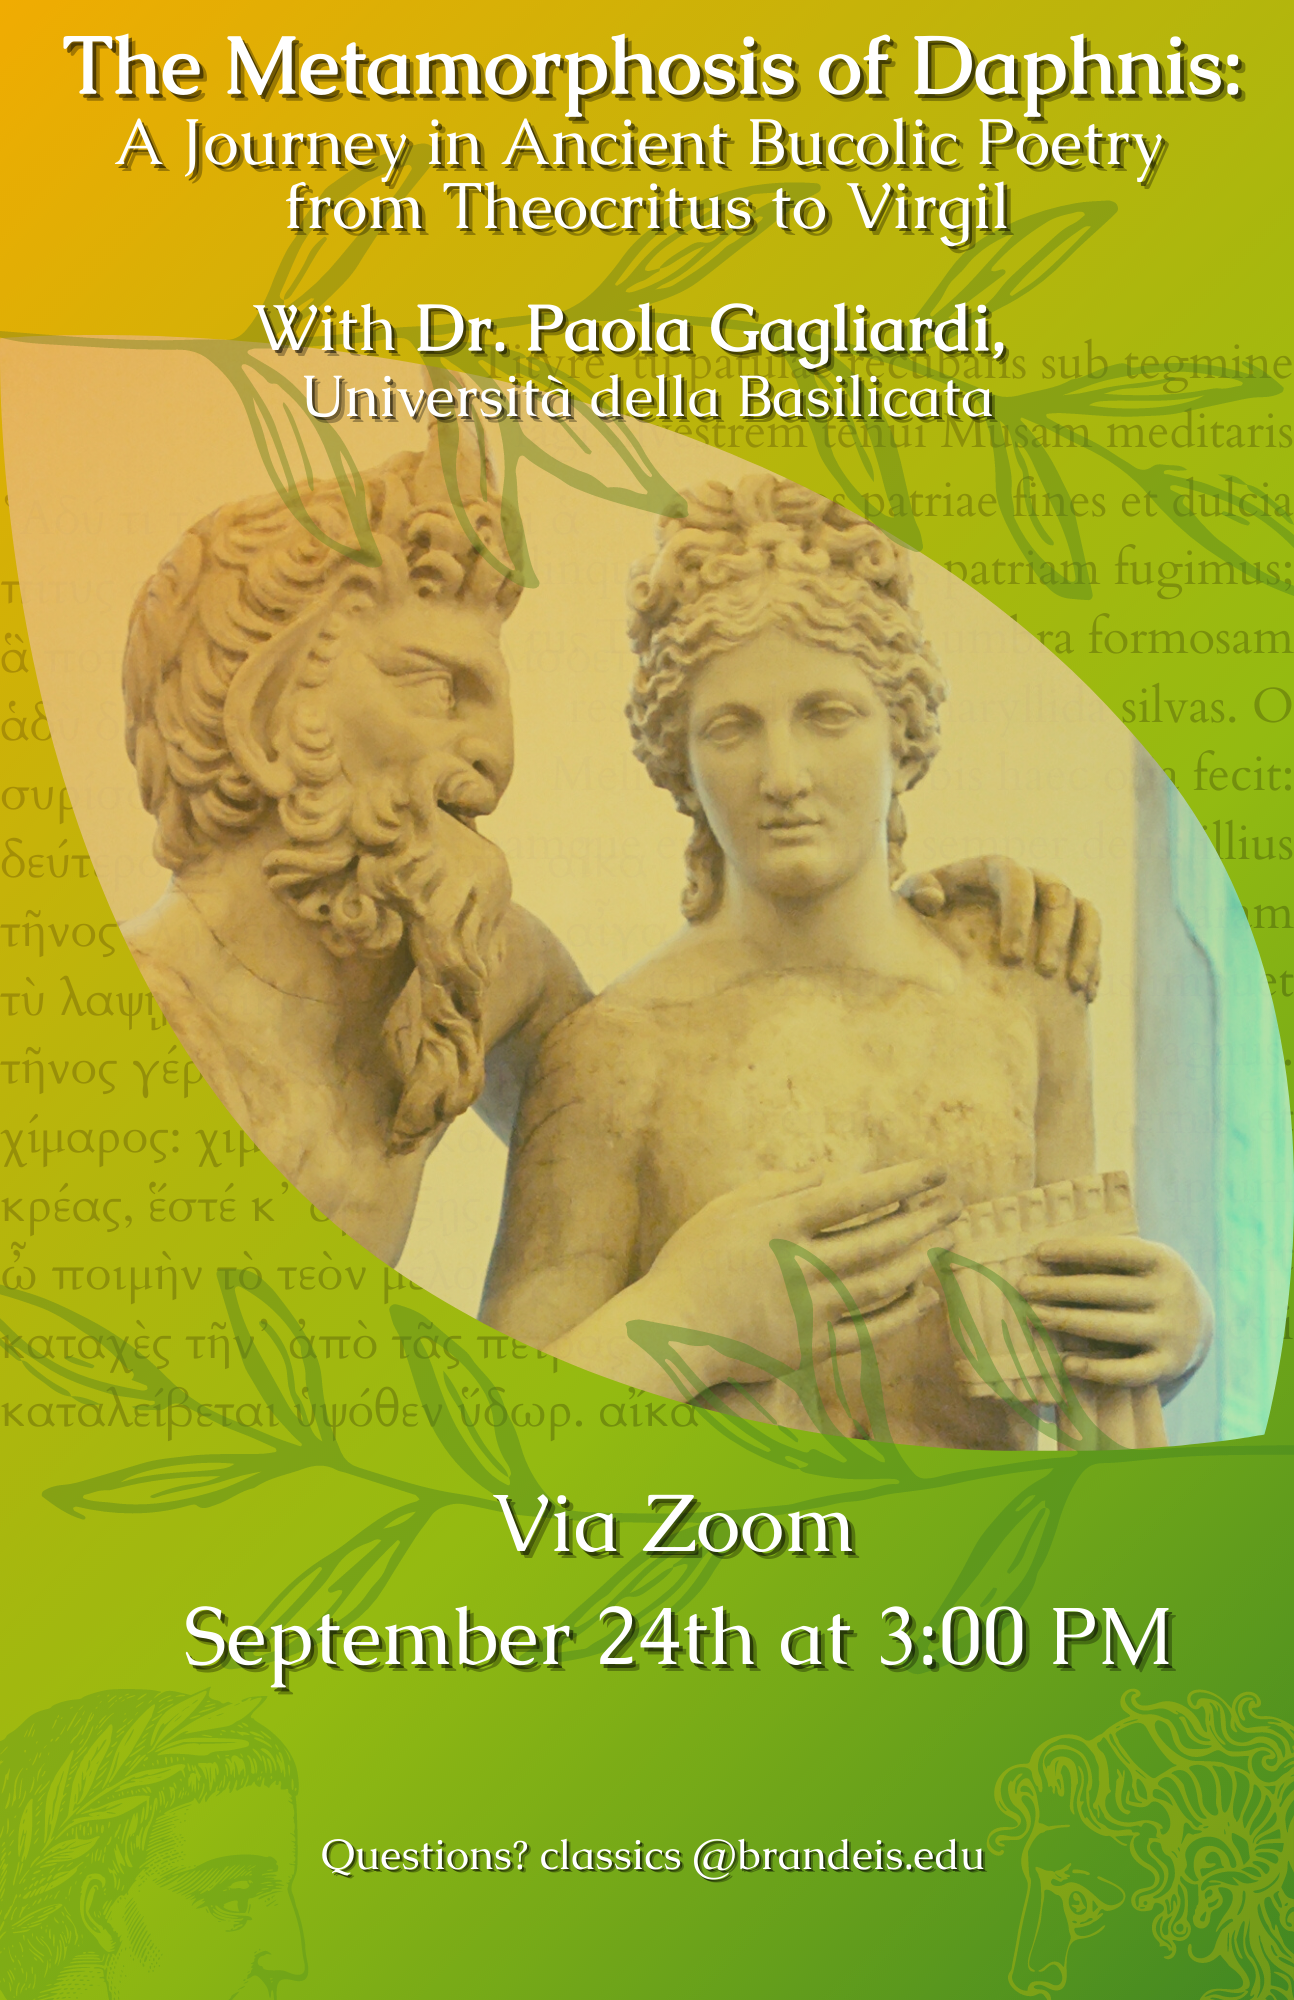 Digital Flyer for Dr. Paola Gagliardi's talk: The Metamorphosis of Daphnis: A Journey in Ancient Bucolic Poetry from Theocritus to Virgil 